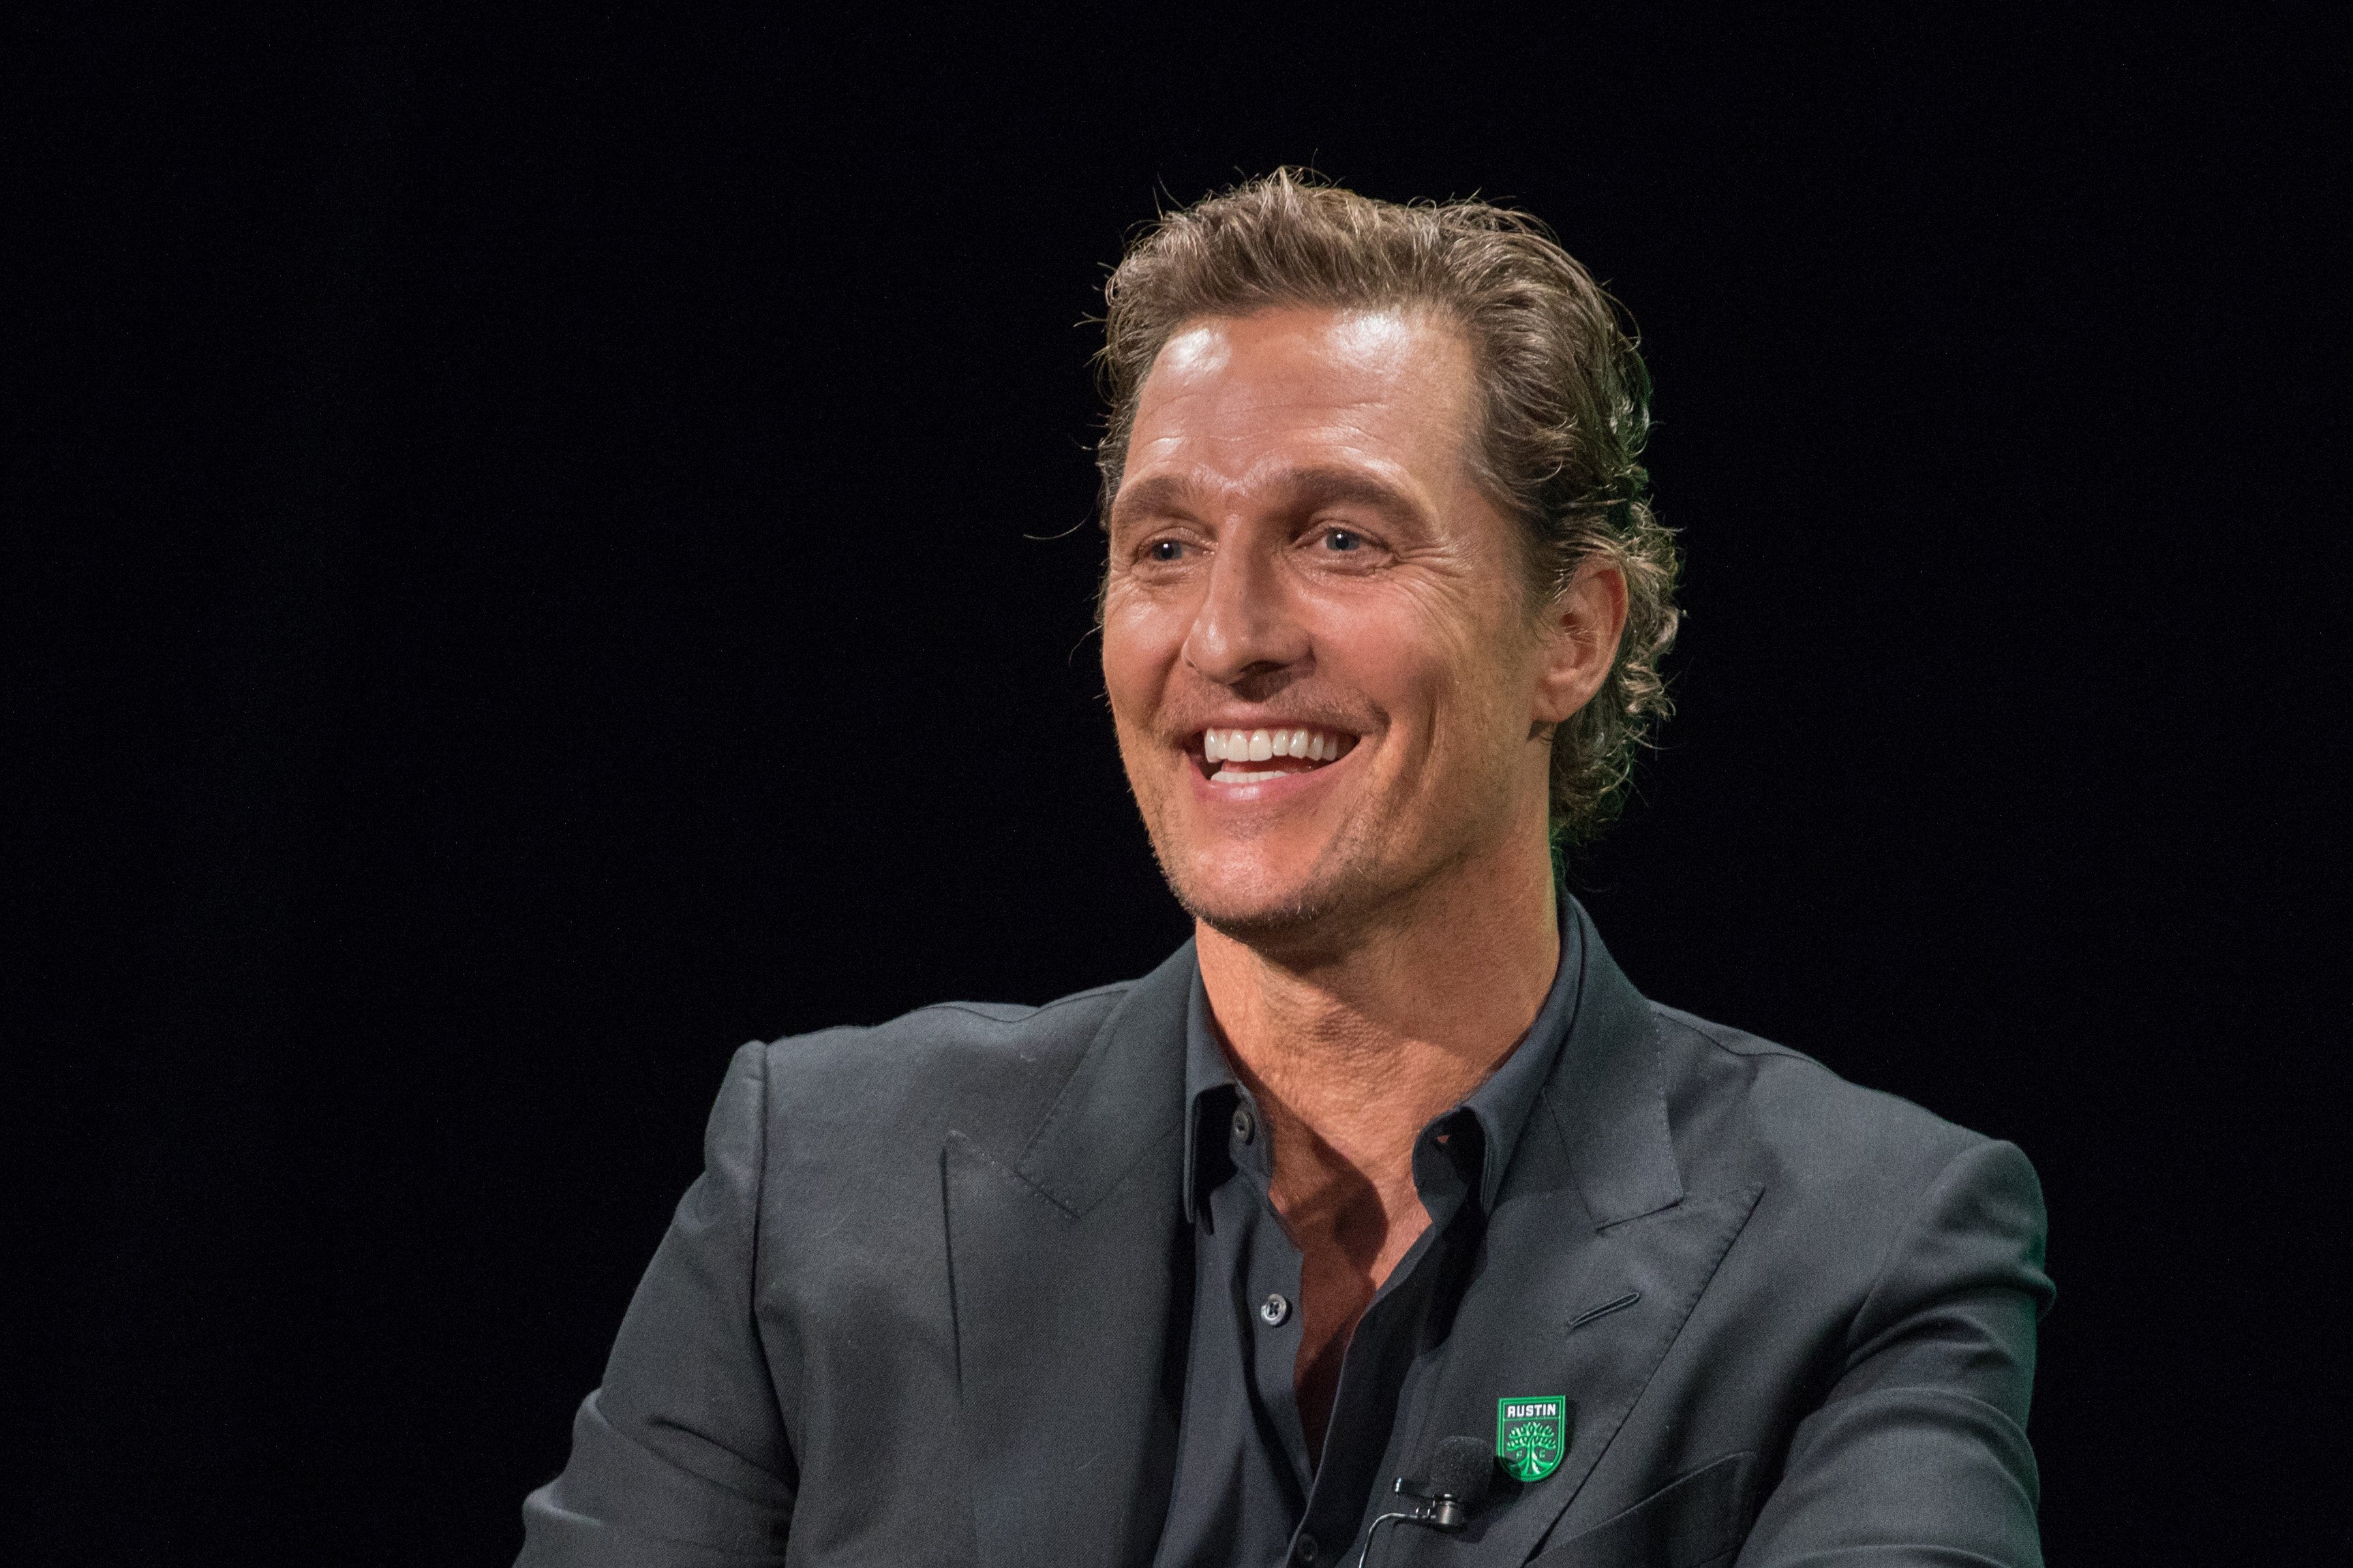 Matthew McConaughey attends the Austin FC announcement new investors at 3TEN ACL Live on August 23, 2019 in Austin, Texas. | Photo: Getty Images